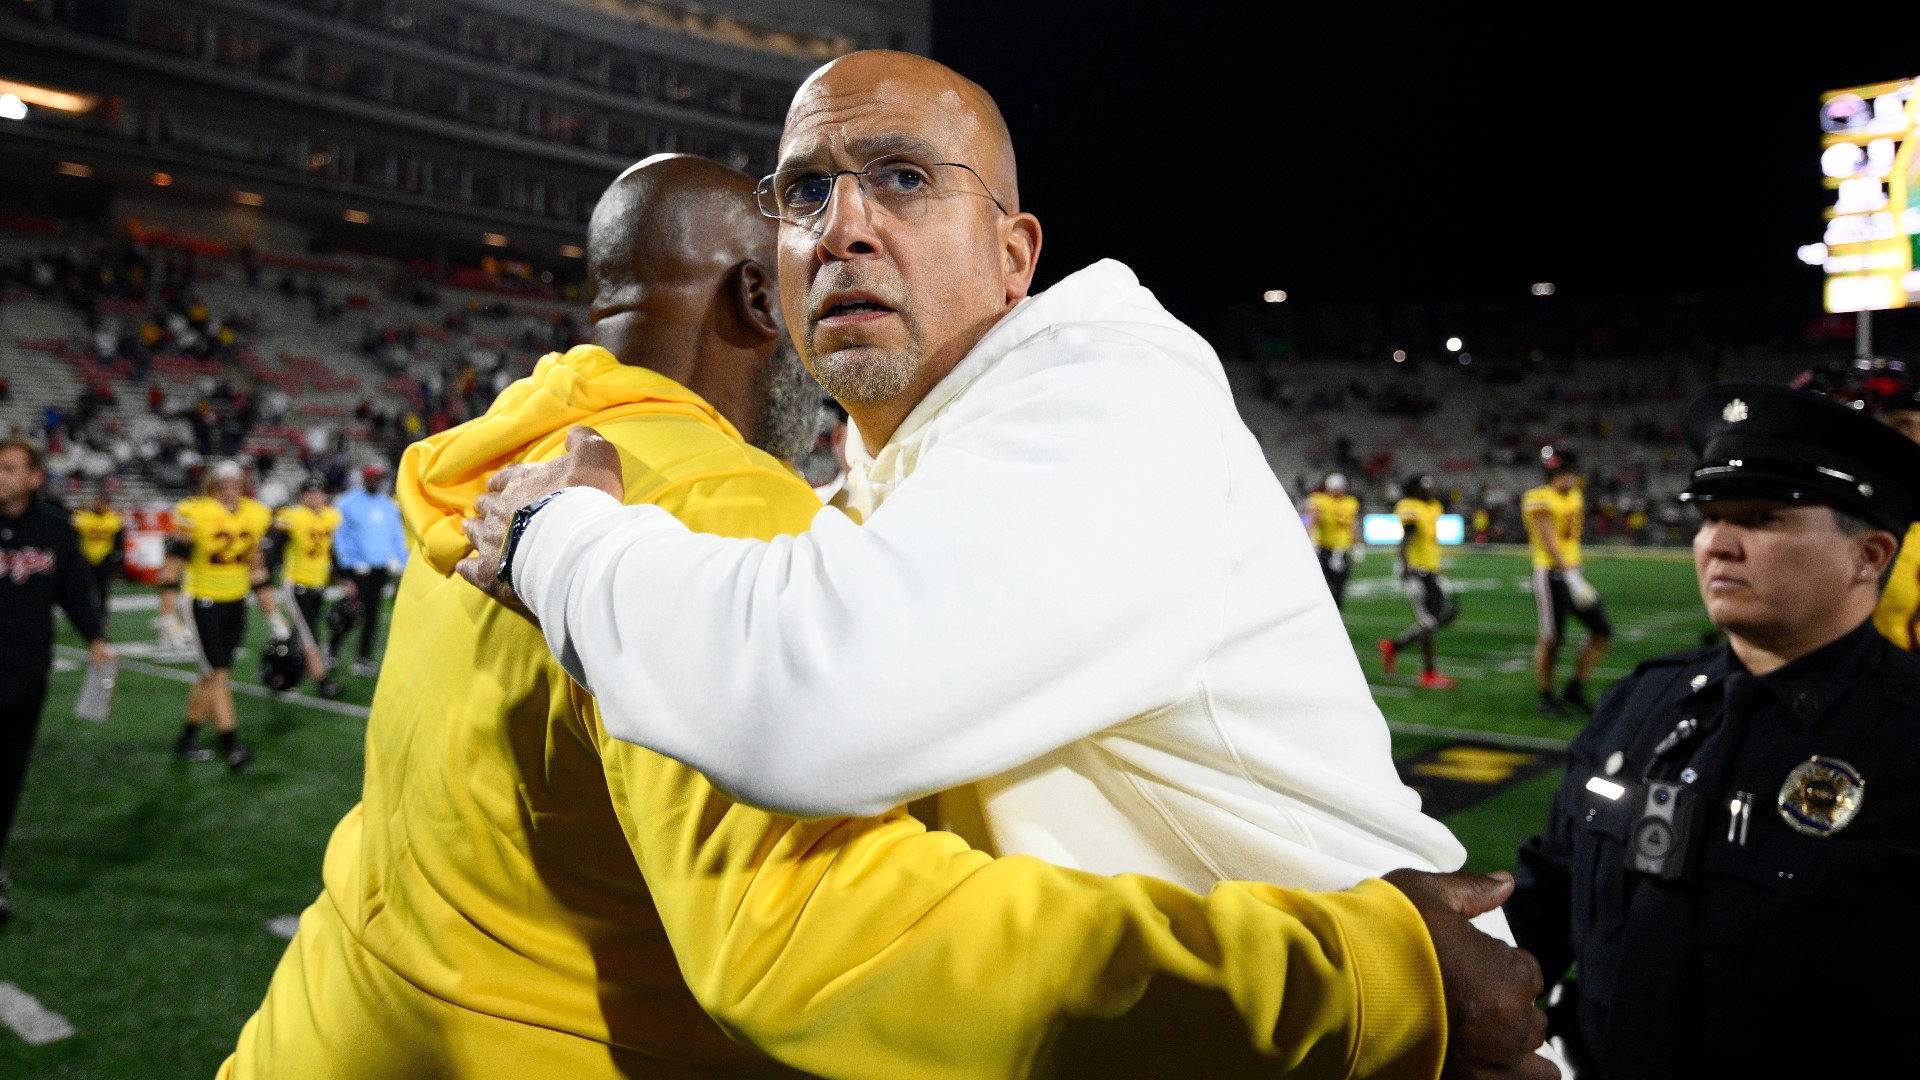 Penn State coach James Franklin spoke after his team beat Maryland on Saturday.